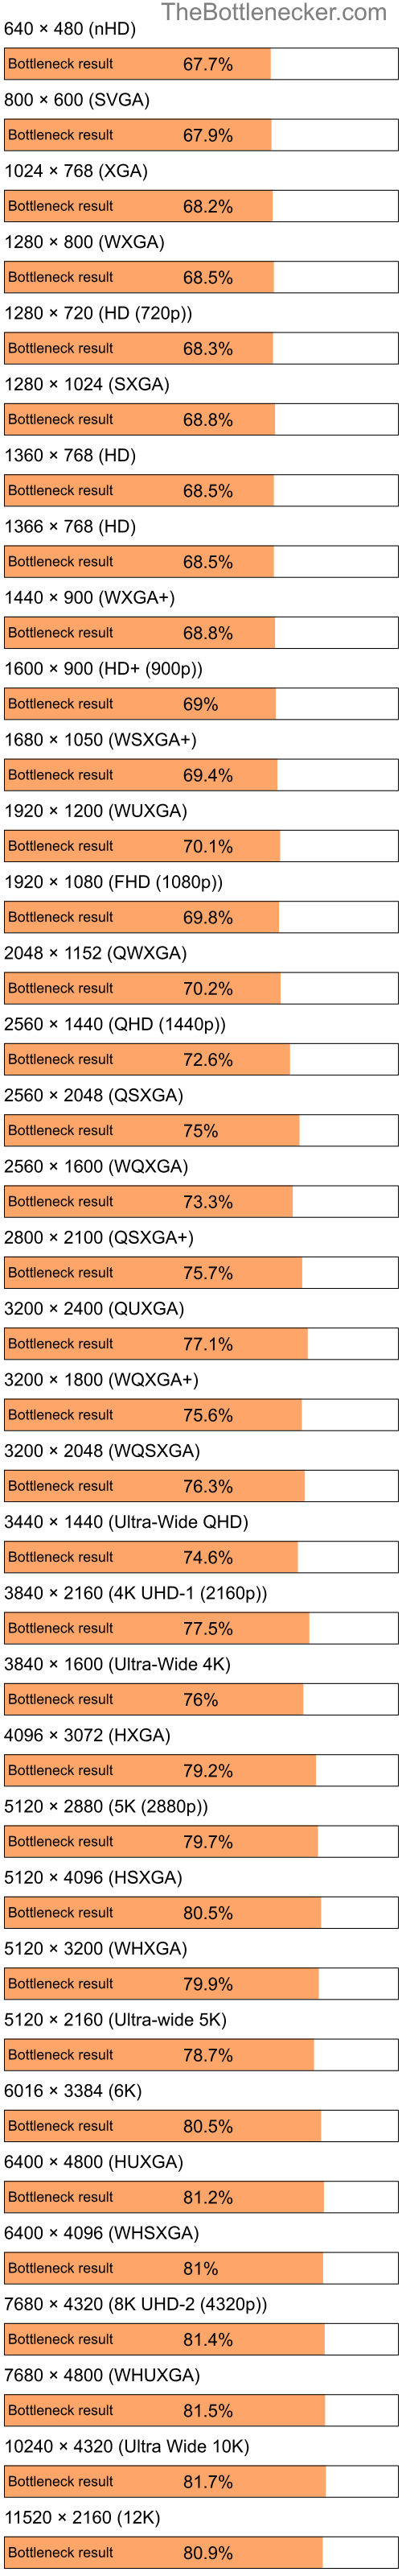 Bottleneck results by resolution for Intel Celeron and NVIDIA Quadro NVS 150M in General Tasks